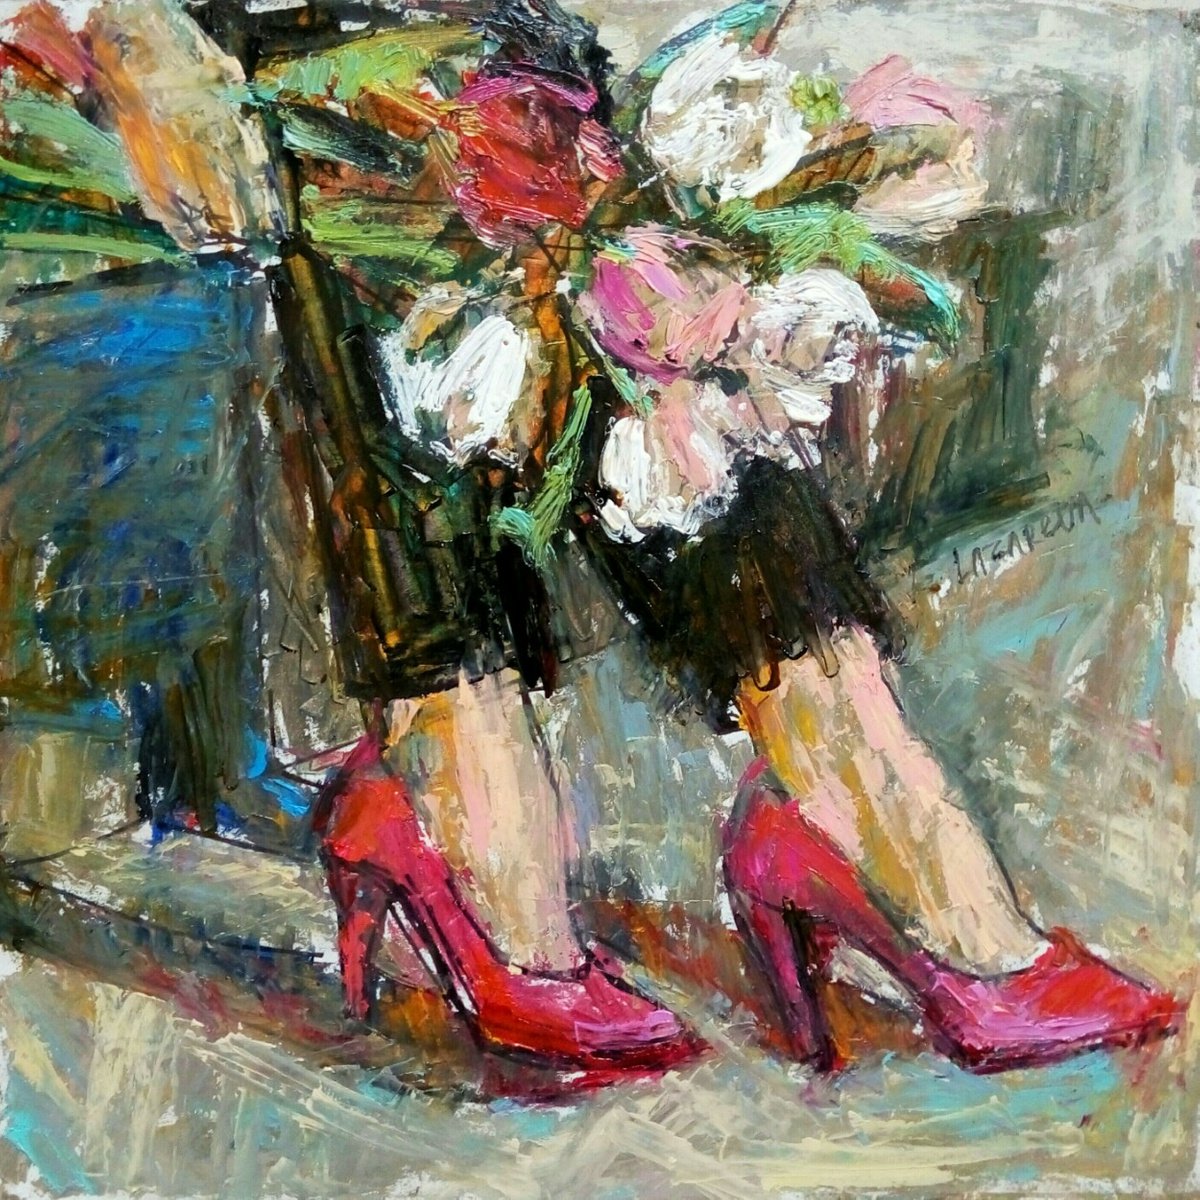 In pink shoes by Valerie Lazareva